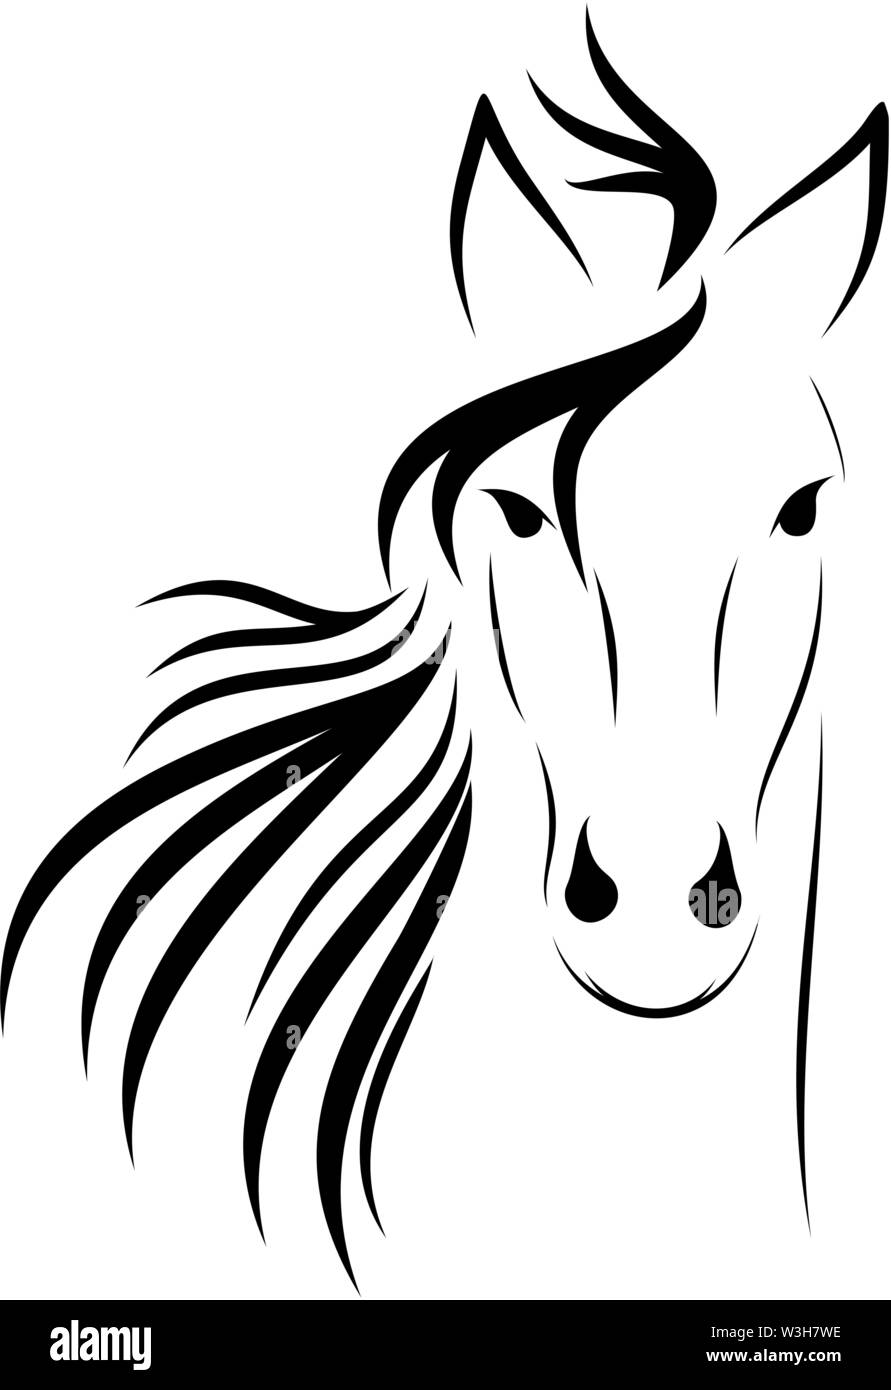 Linear drawing horse genre minimalism Stock Vector